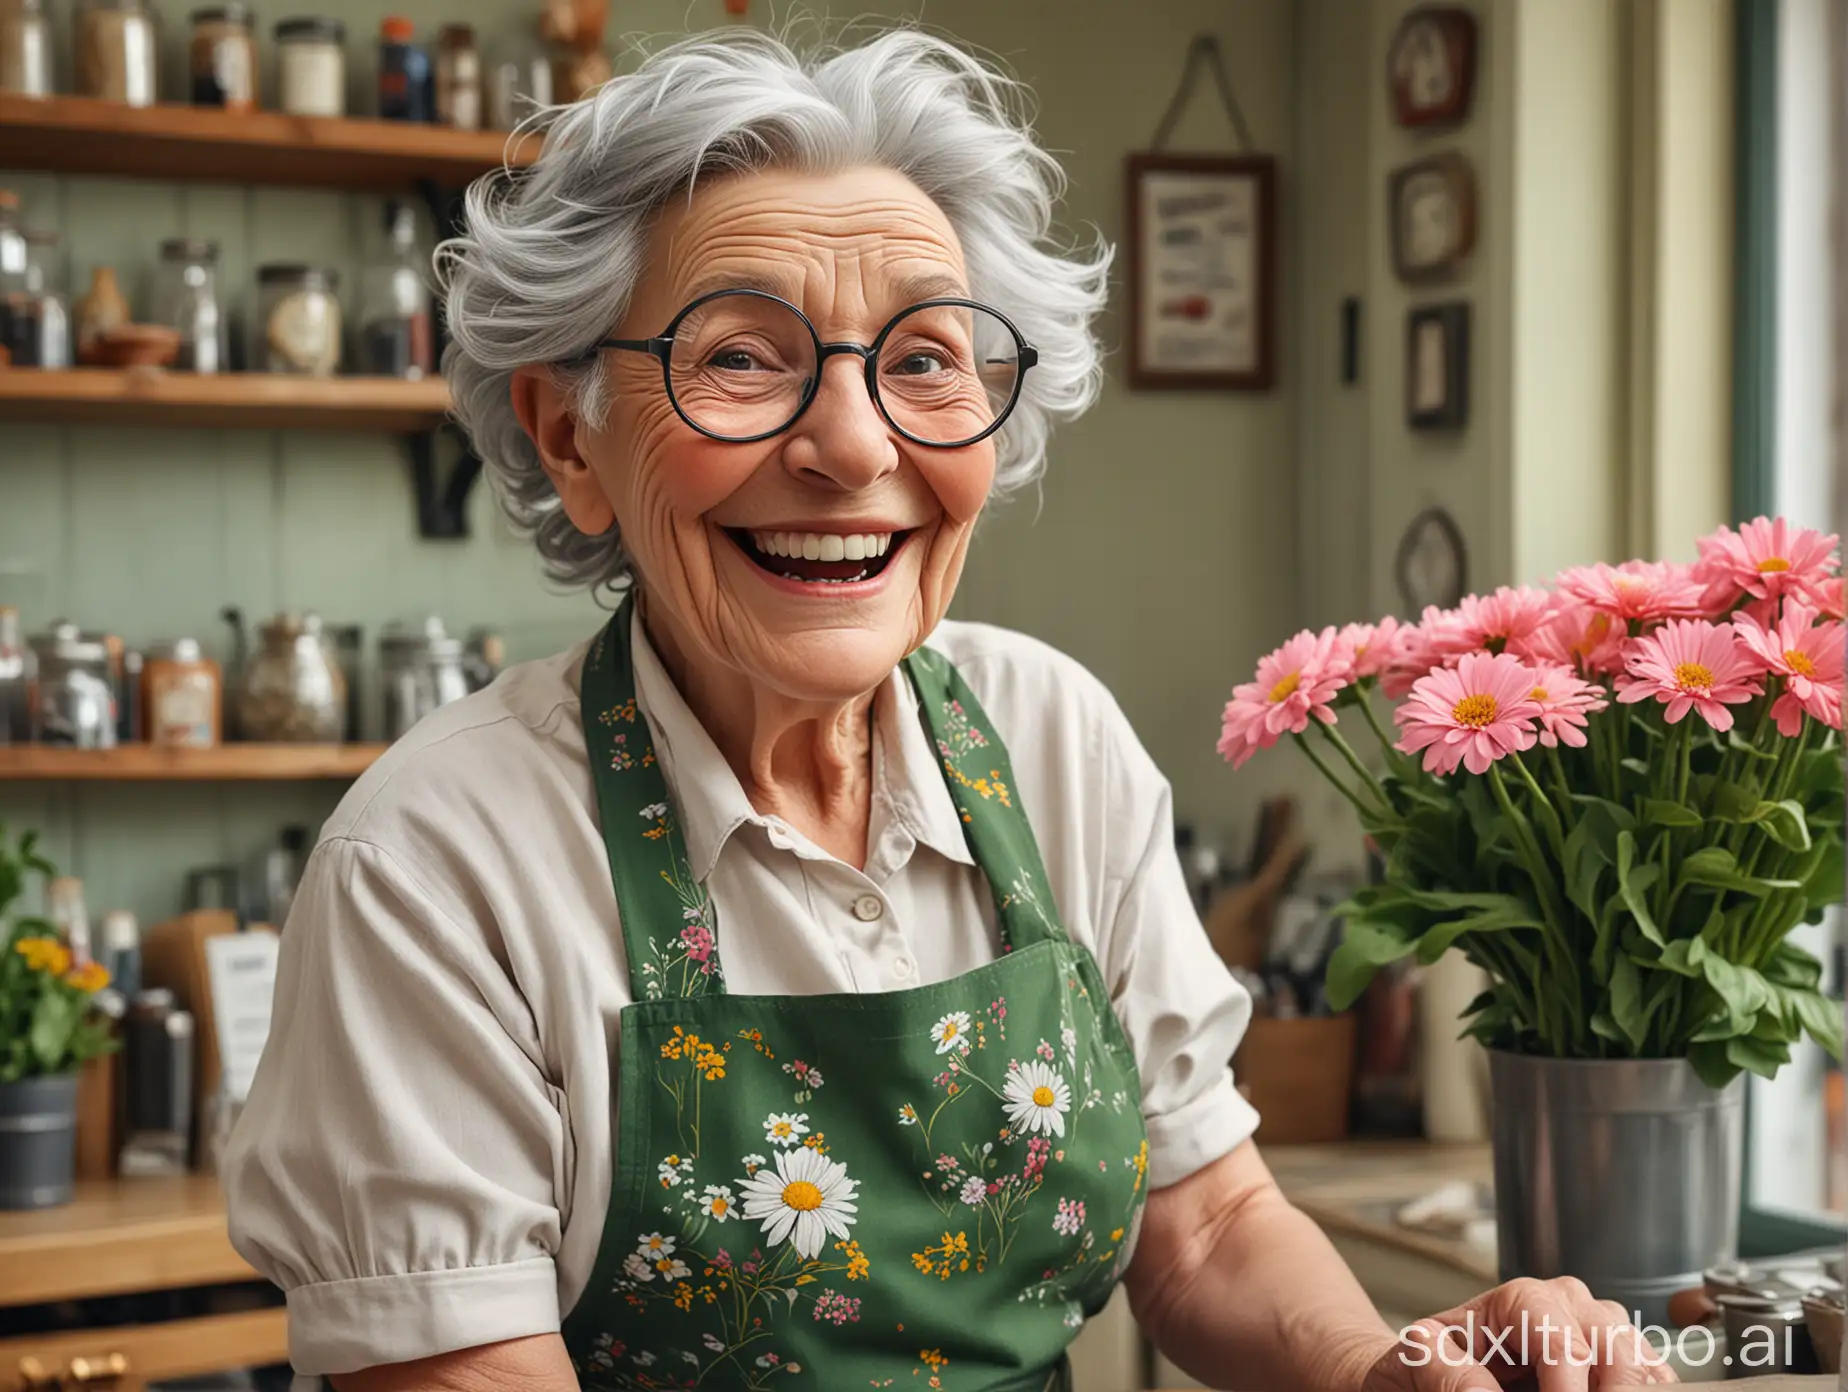 Whimsical cartoonishly realistic image of an old lady with wild grey hair that's sticking out in a umkempt state, many wrinkles, big round glasses, big grin. She is wearing an apron, standing behind a counter in a flower shop.
